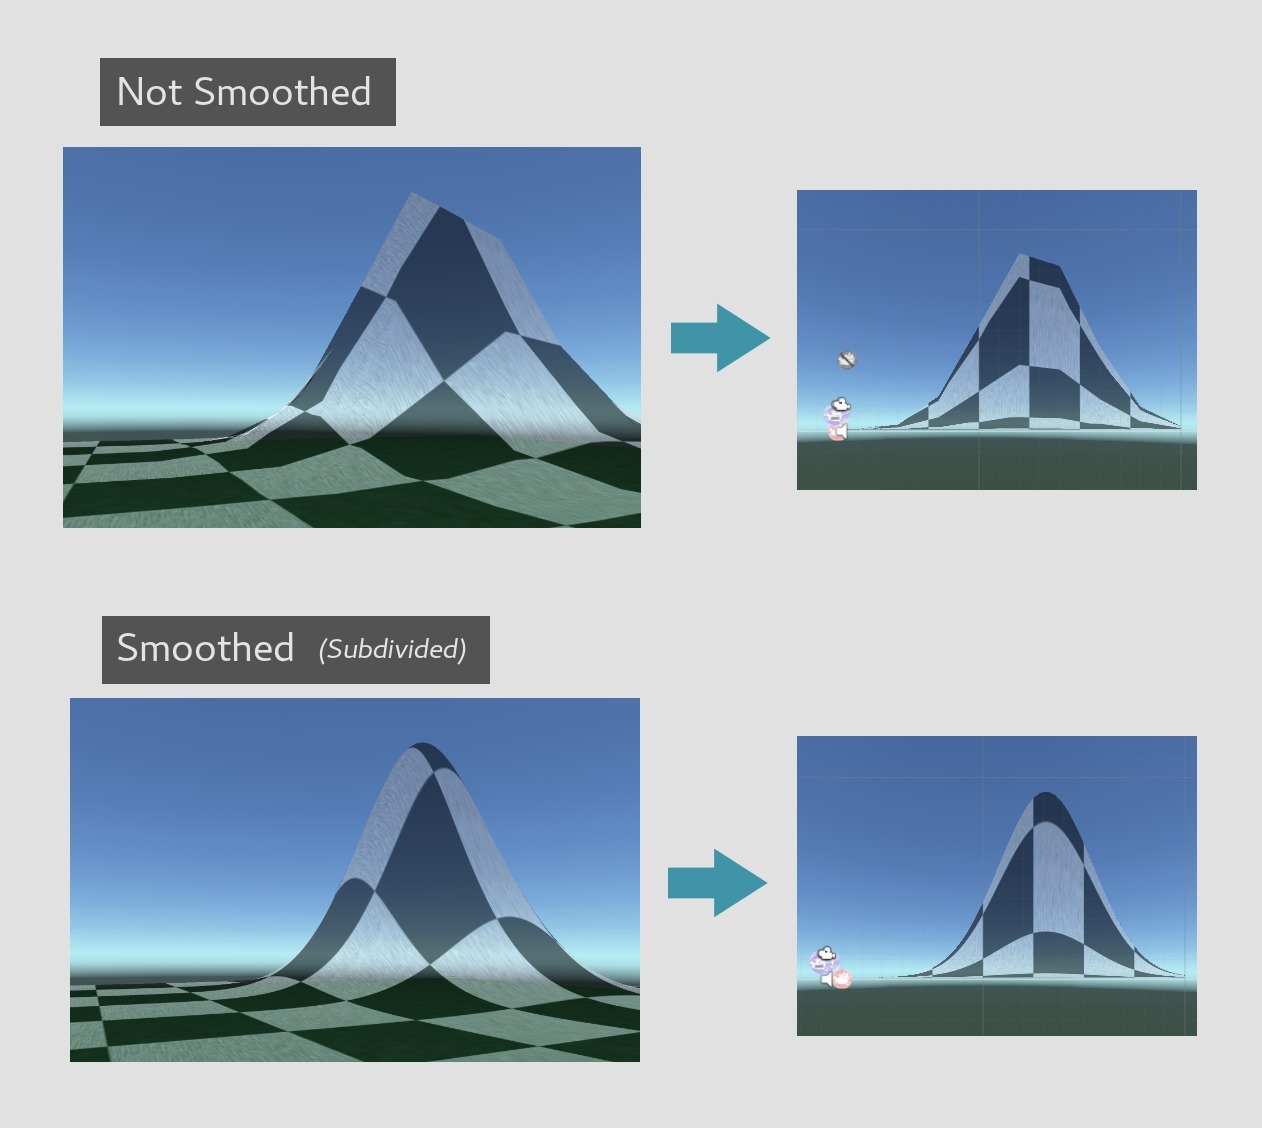 Non-Smoothed vs Smoothed Mesh Comparison